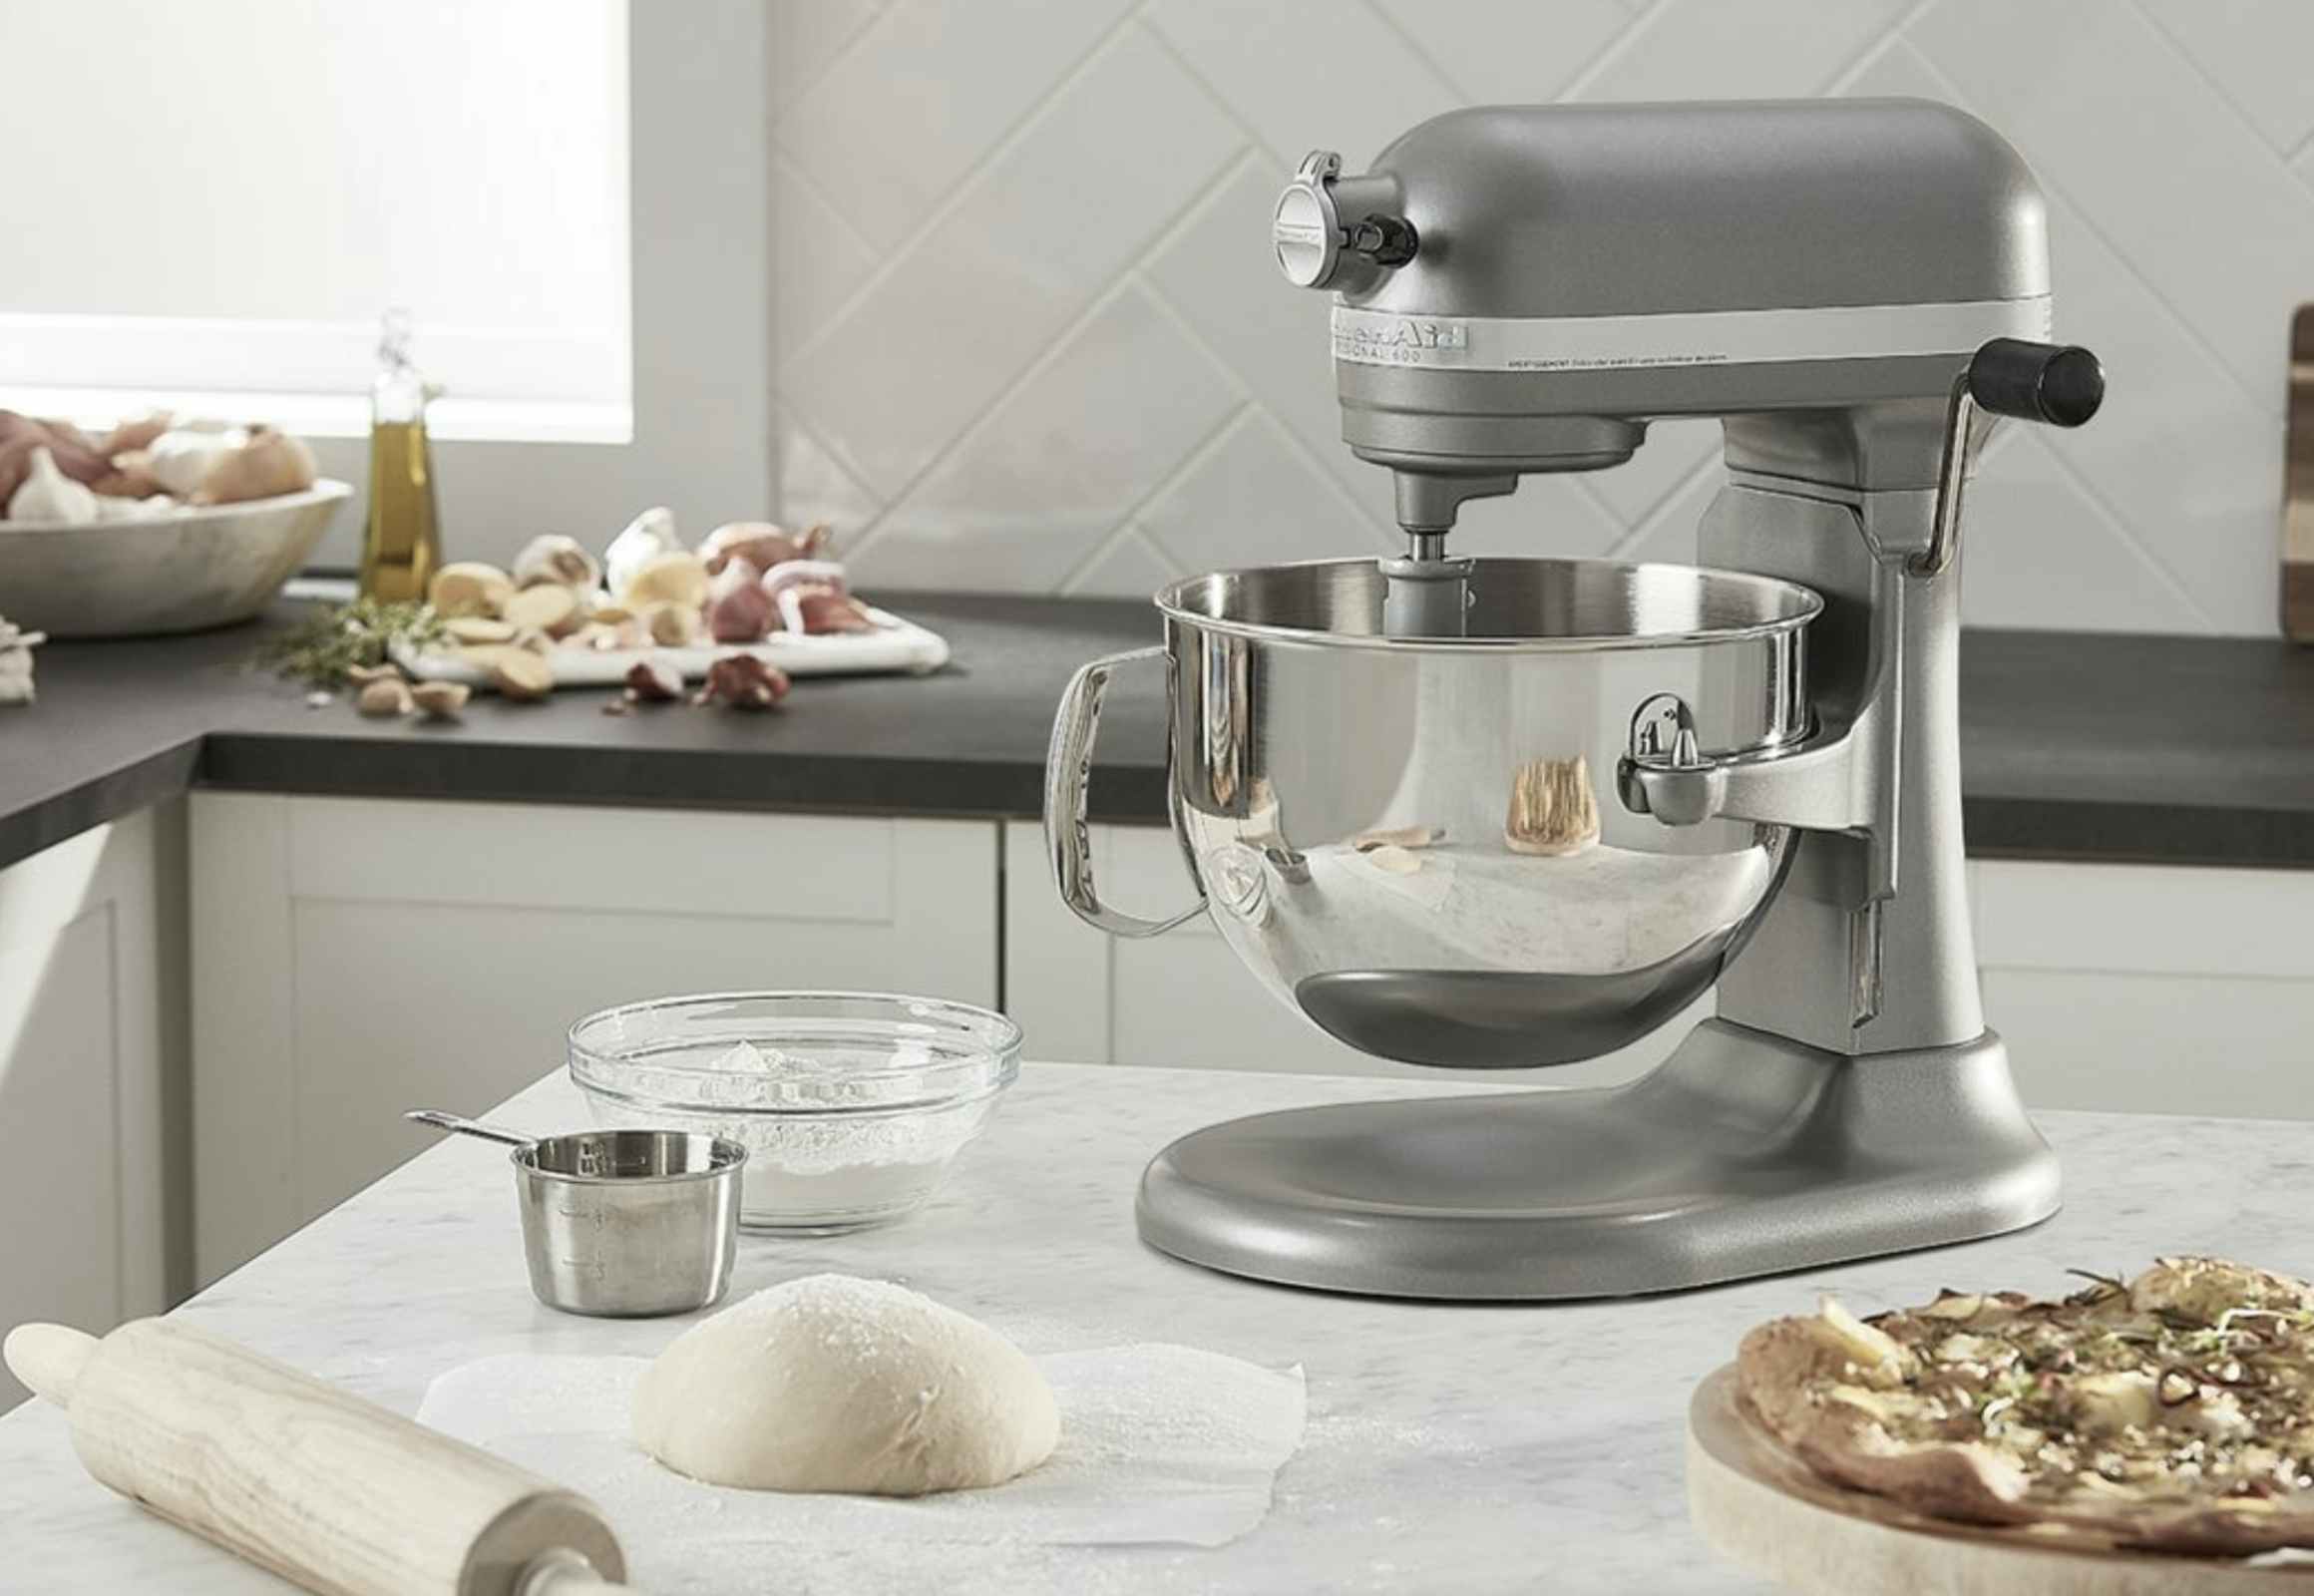 7 Tricks For Finding a KitchenAid Mixer Sale to Get the Best Price - The  Krazy Coupon Lady